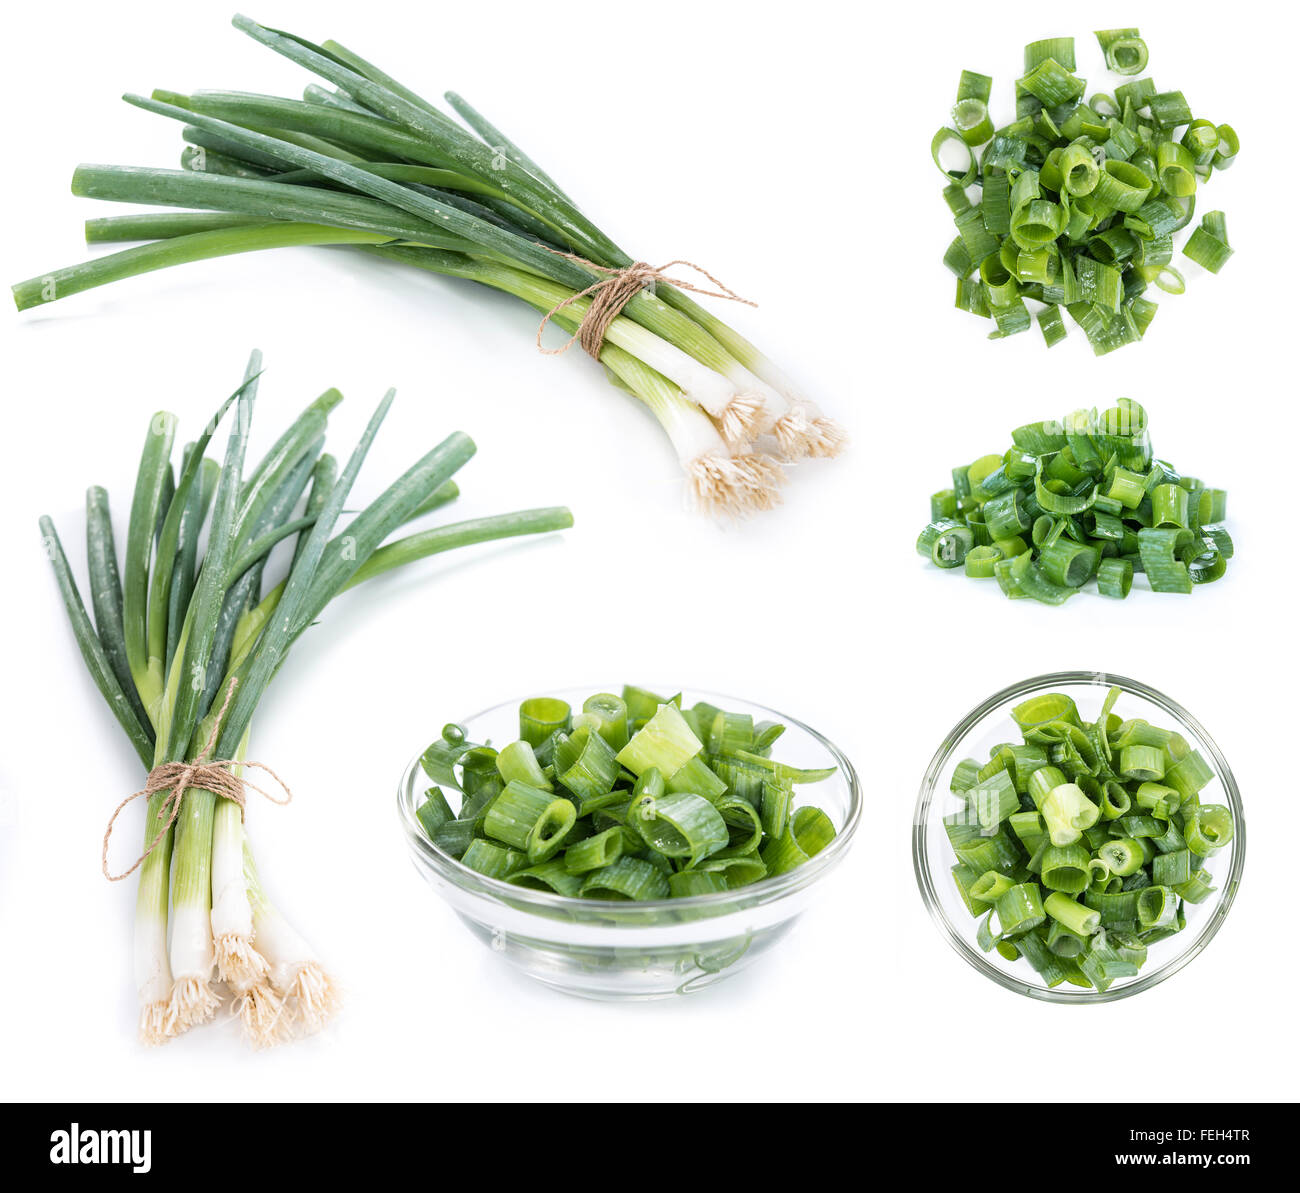 Scallions (different images) isolated on white background Stock Photo